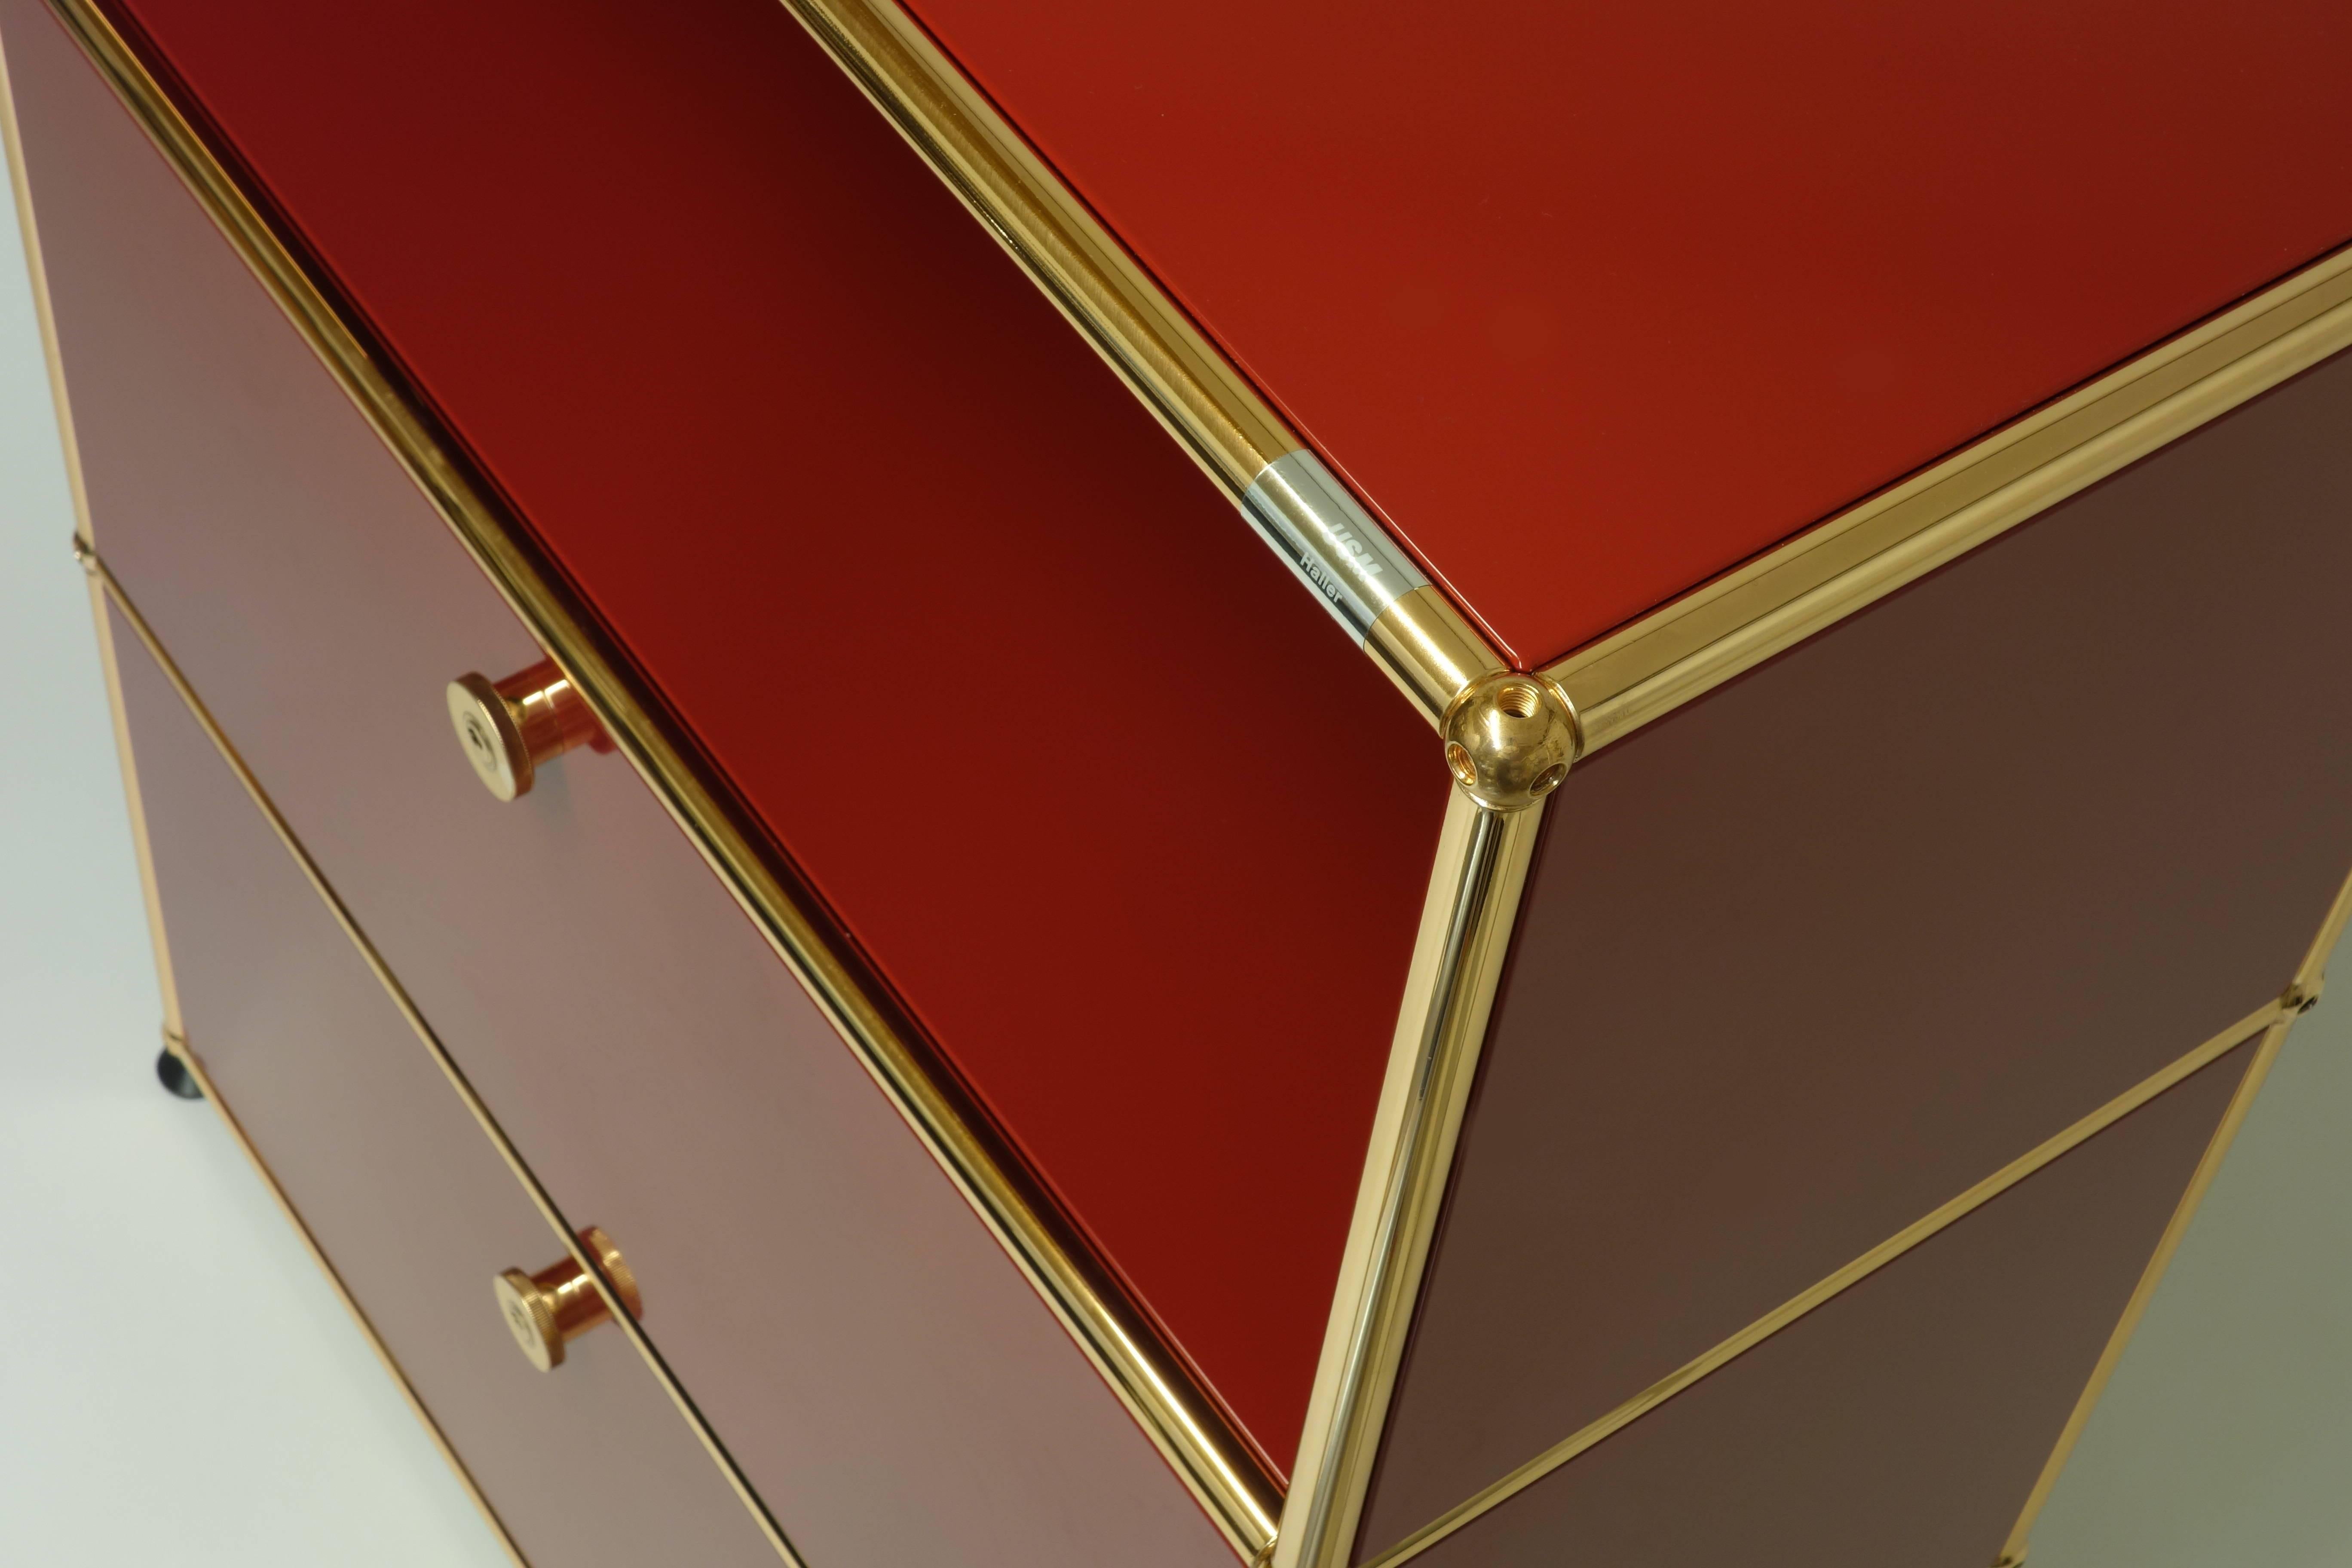 Chest of drawers by USM Haller with two panels and one open shelf in red color. Tubes, bowls and handles are copper plated and varnished.